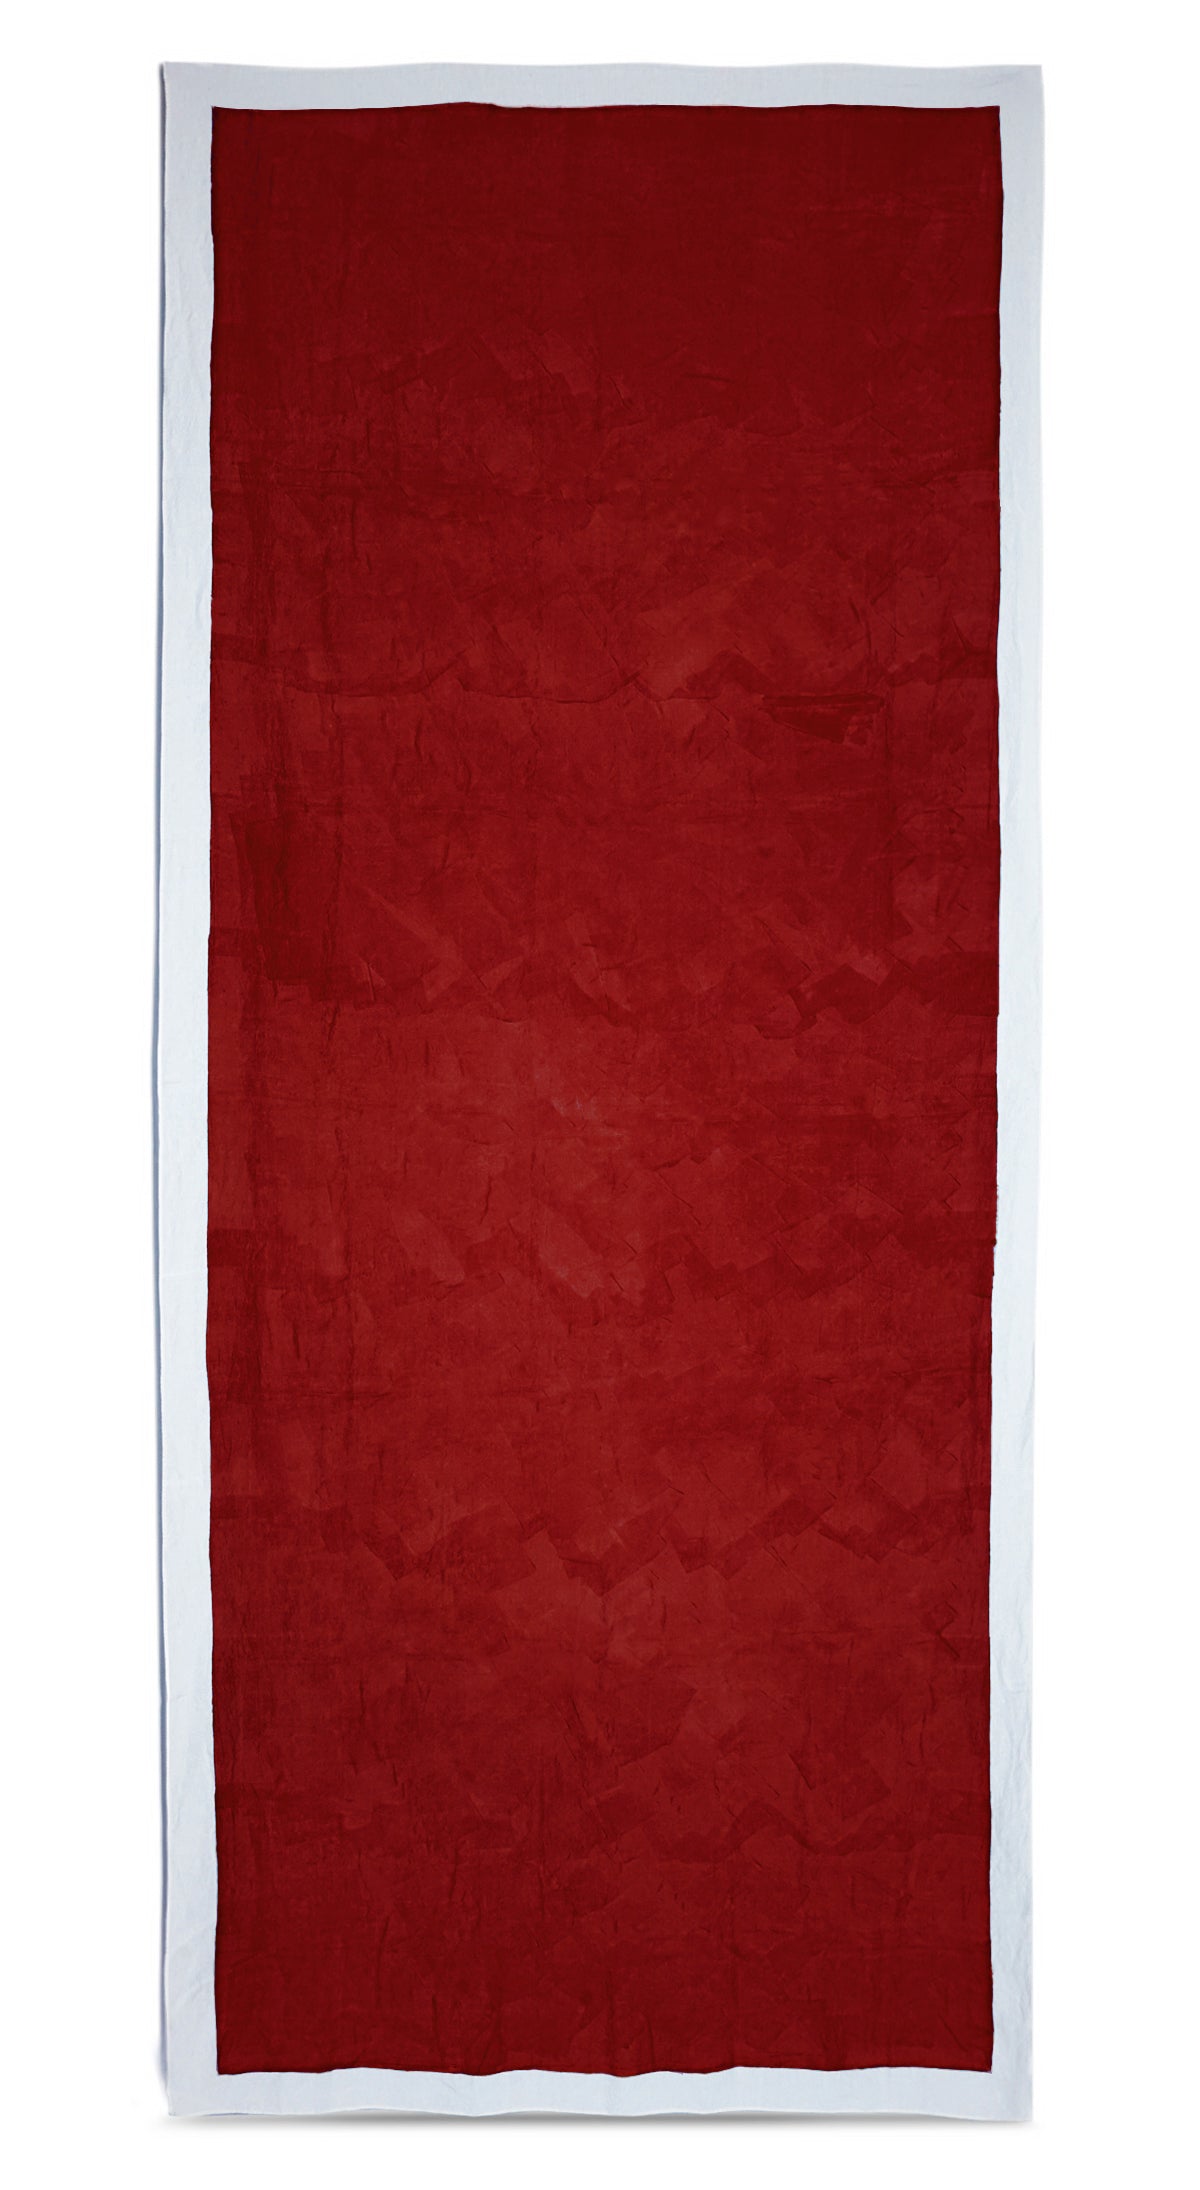 Full Field Linen Tablecloth in Claret Red